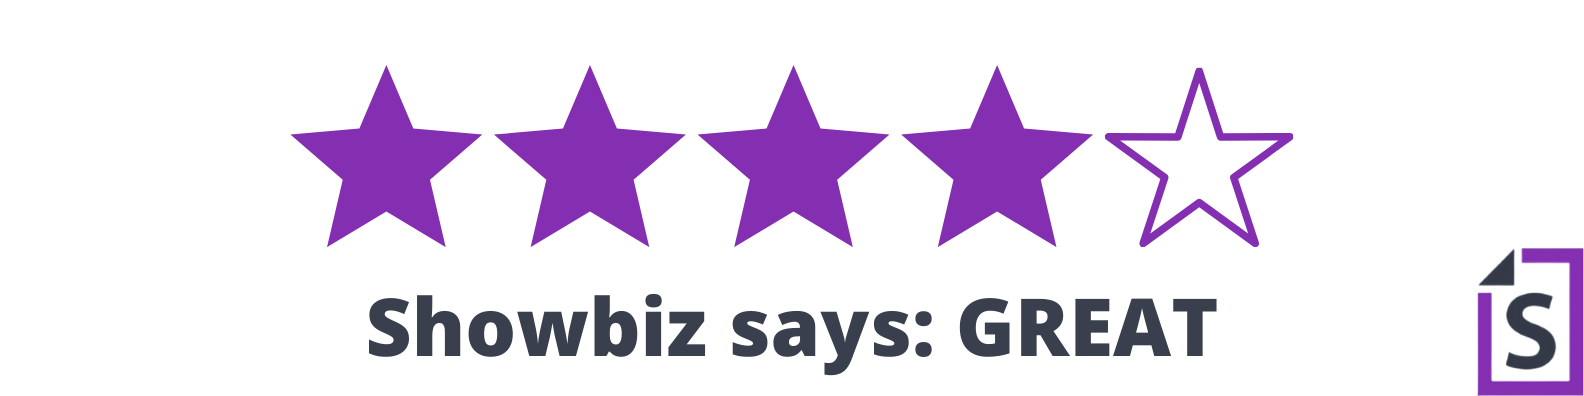 4 purple stars filled in above 'Showbiz says: GREAT'